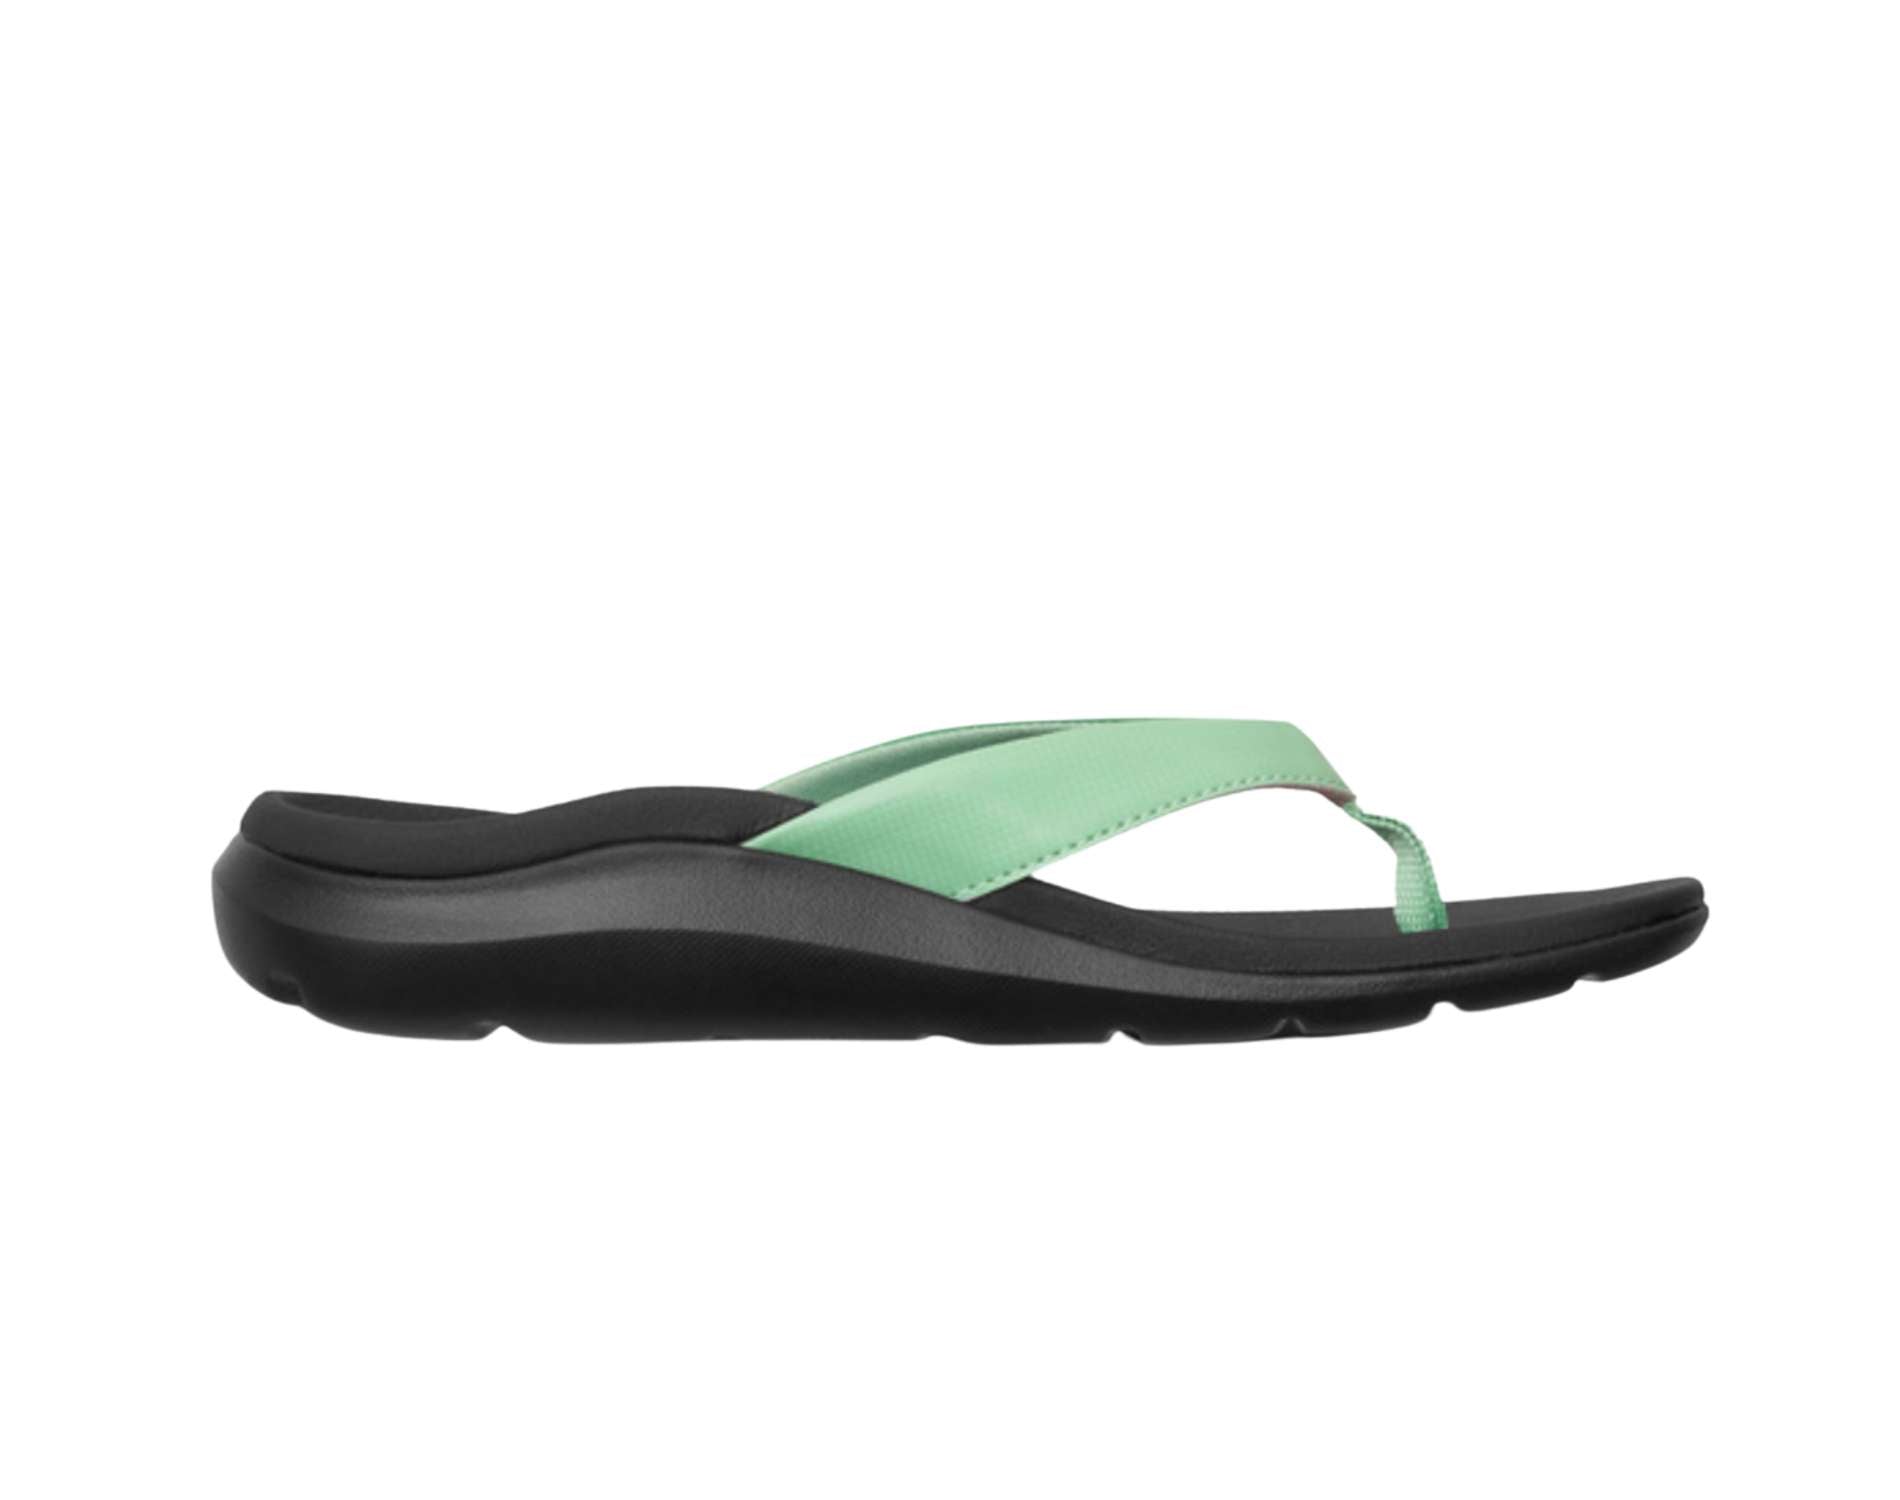 Ascent's Groove sandals for women in sage colour